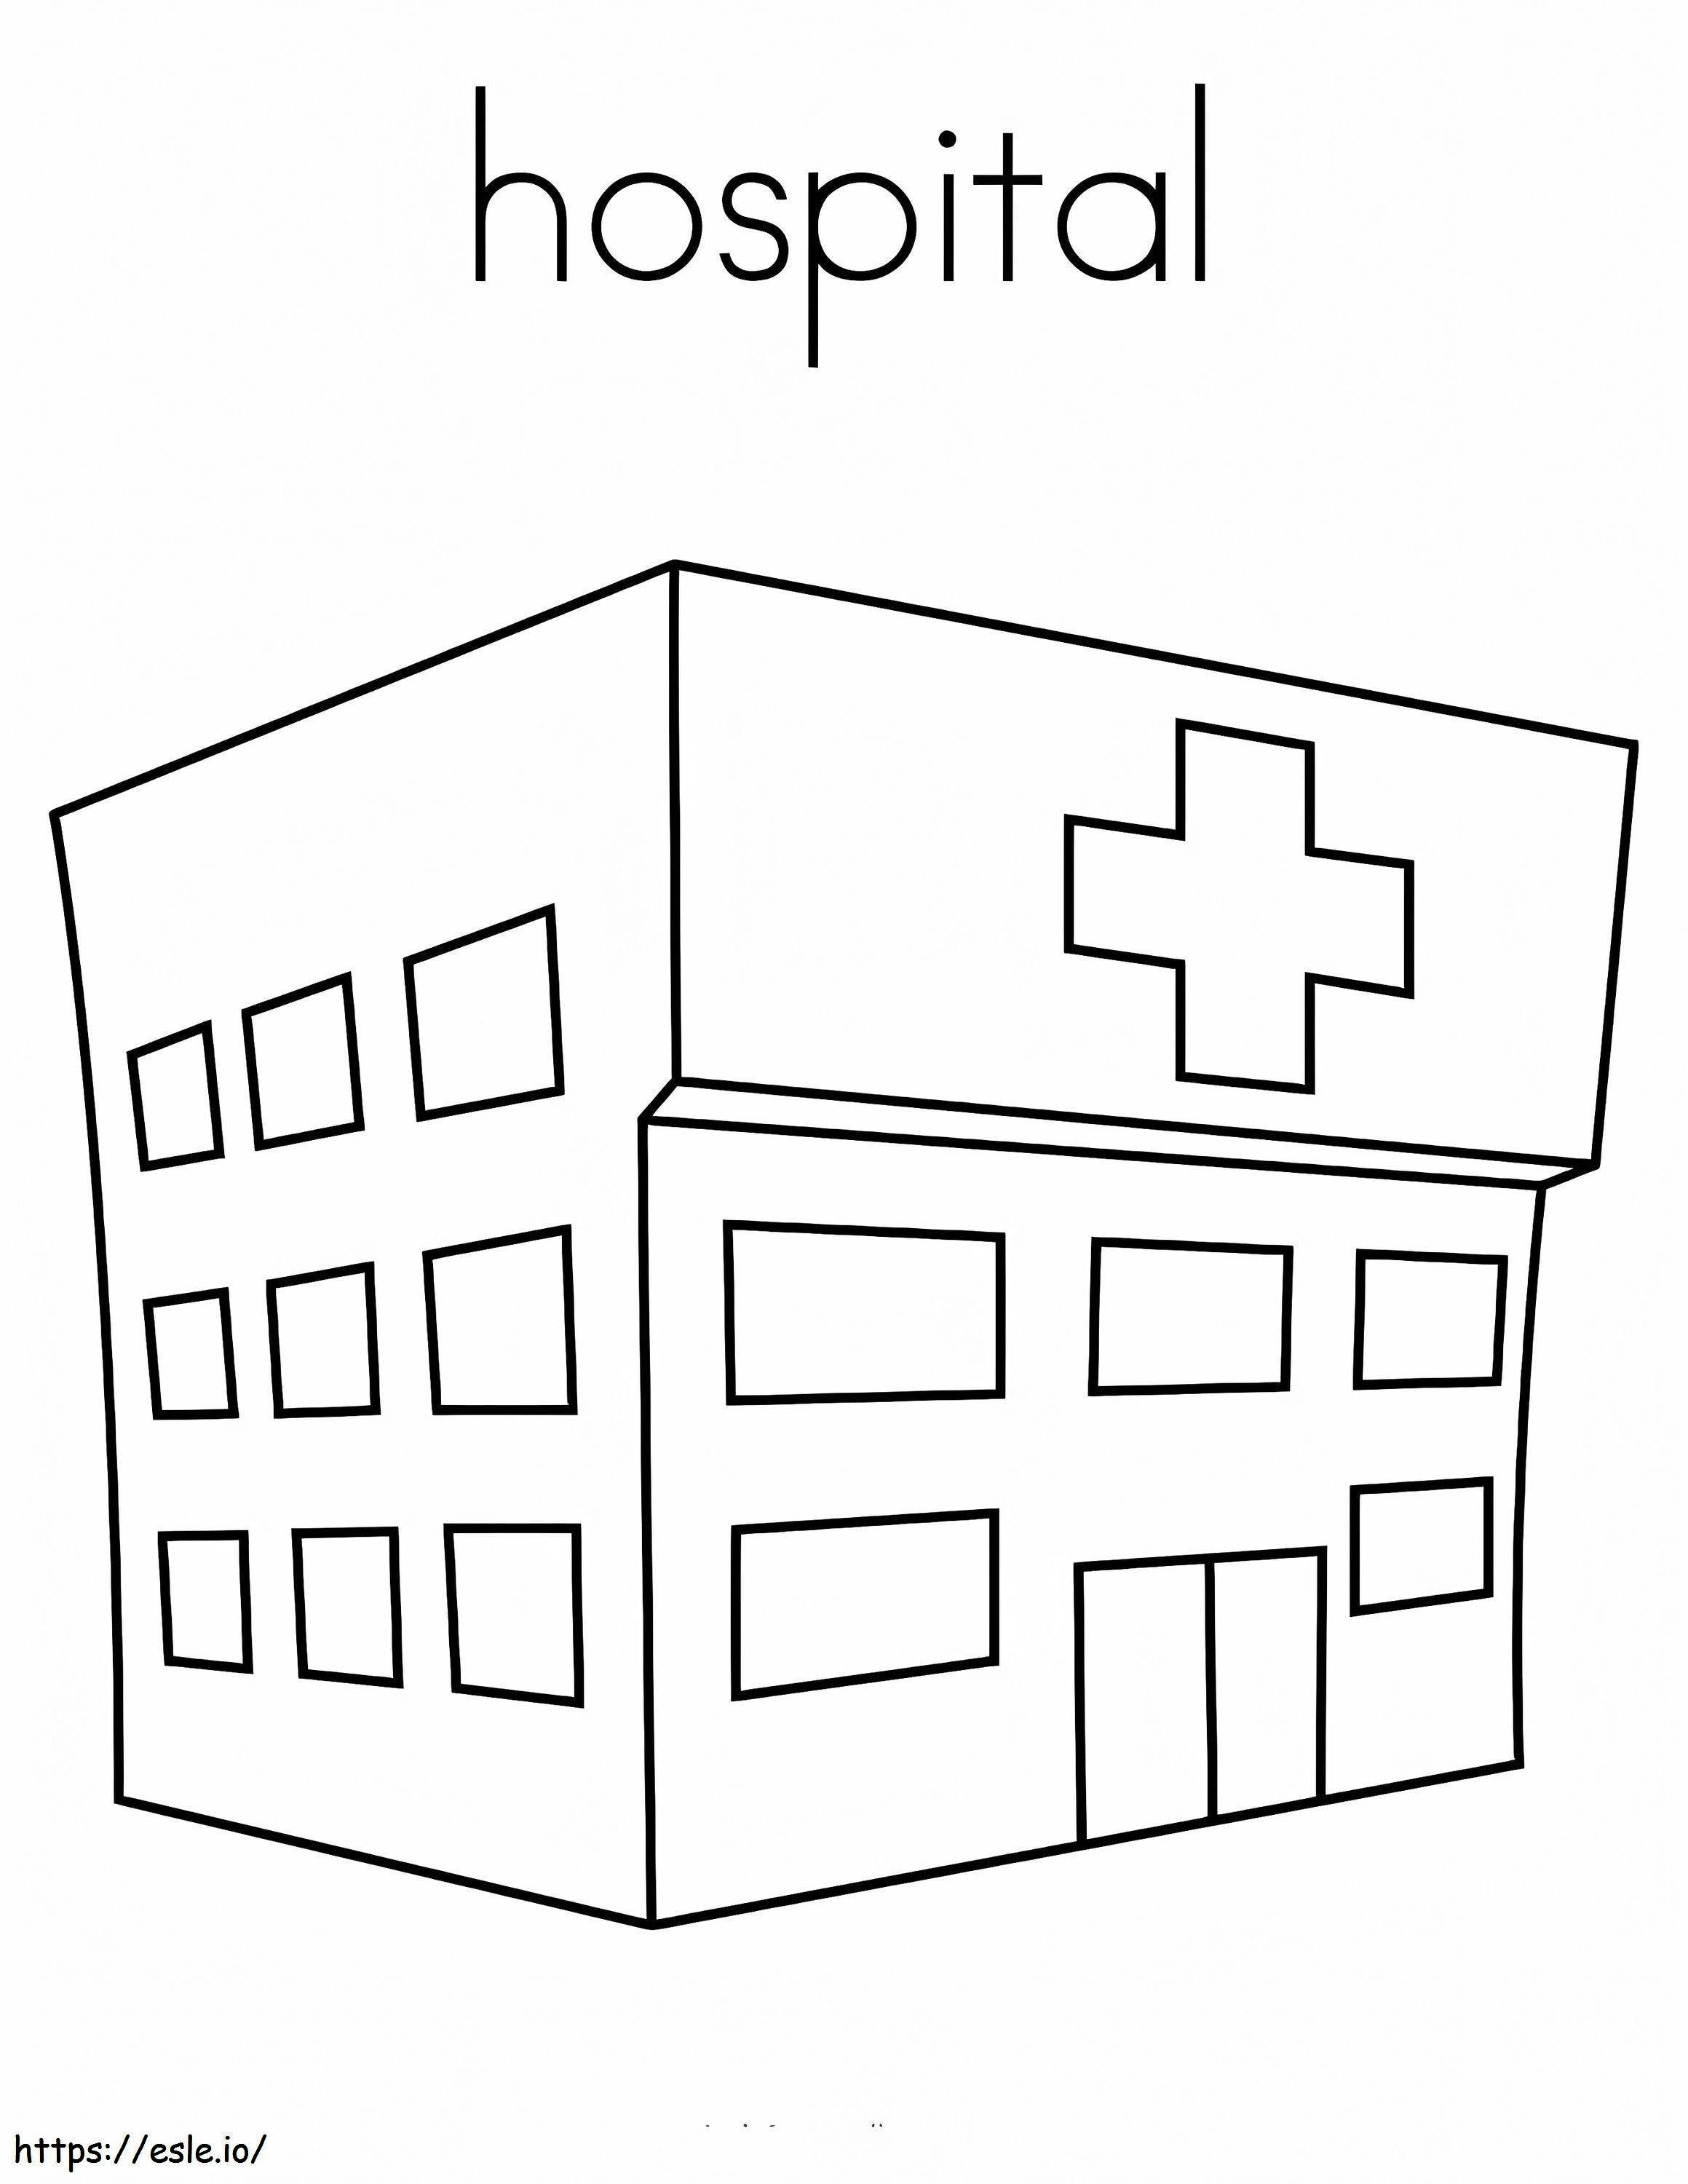 Simple Hospital coloring page